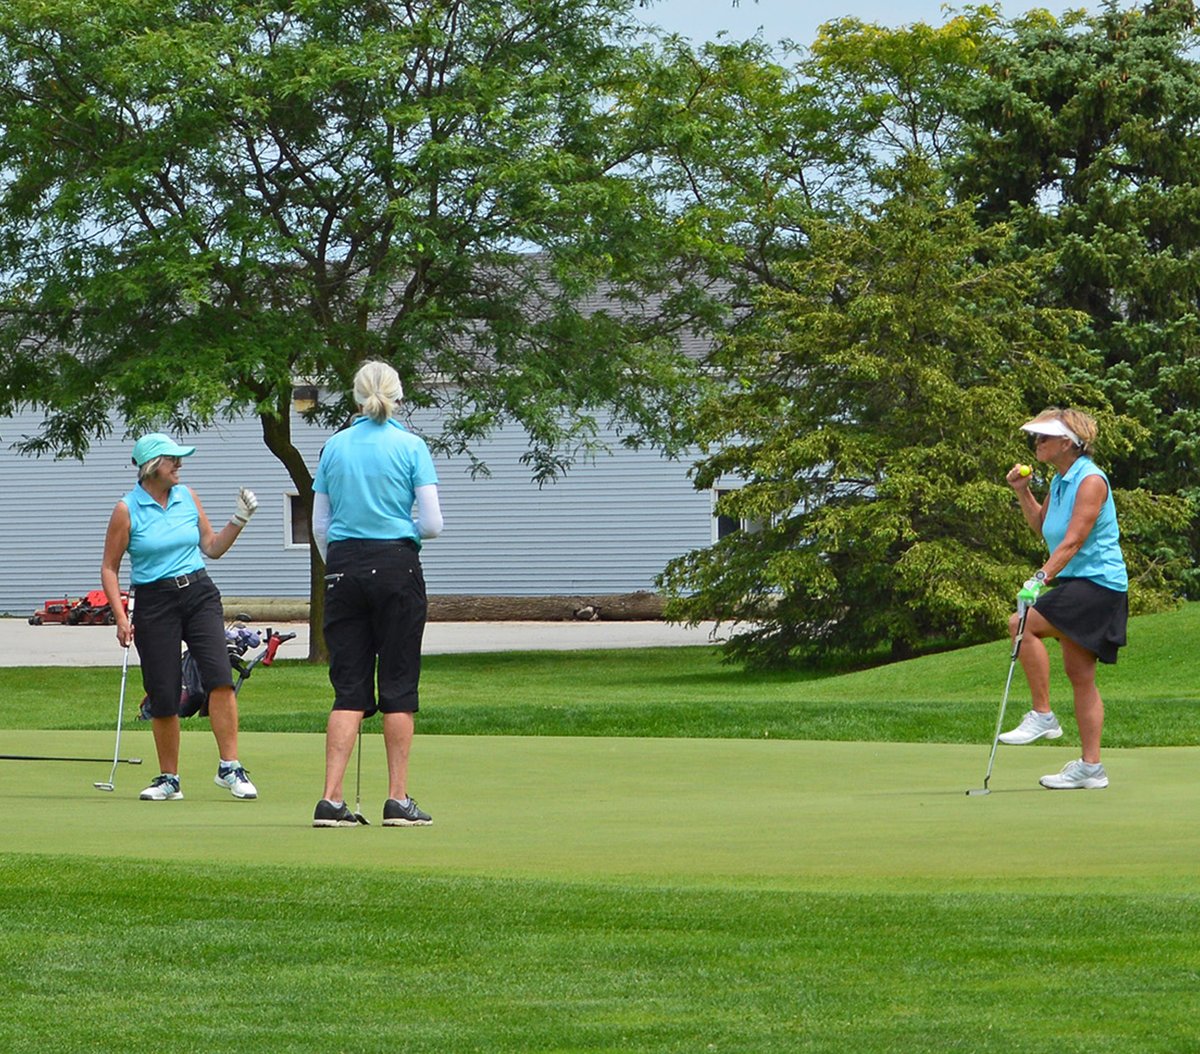 It's Ladies' Opening Day. 
Good luck to all those participating.

#openingday #stcgcc #clubevents #stcatharinesgolf